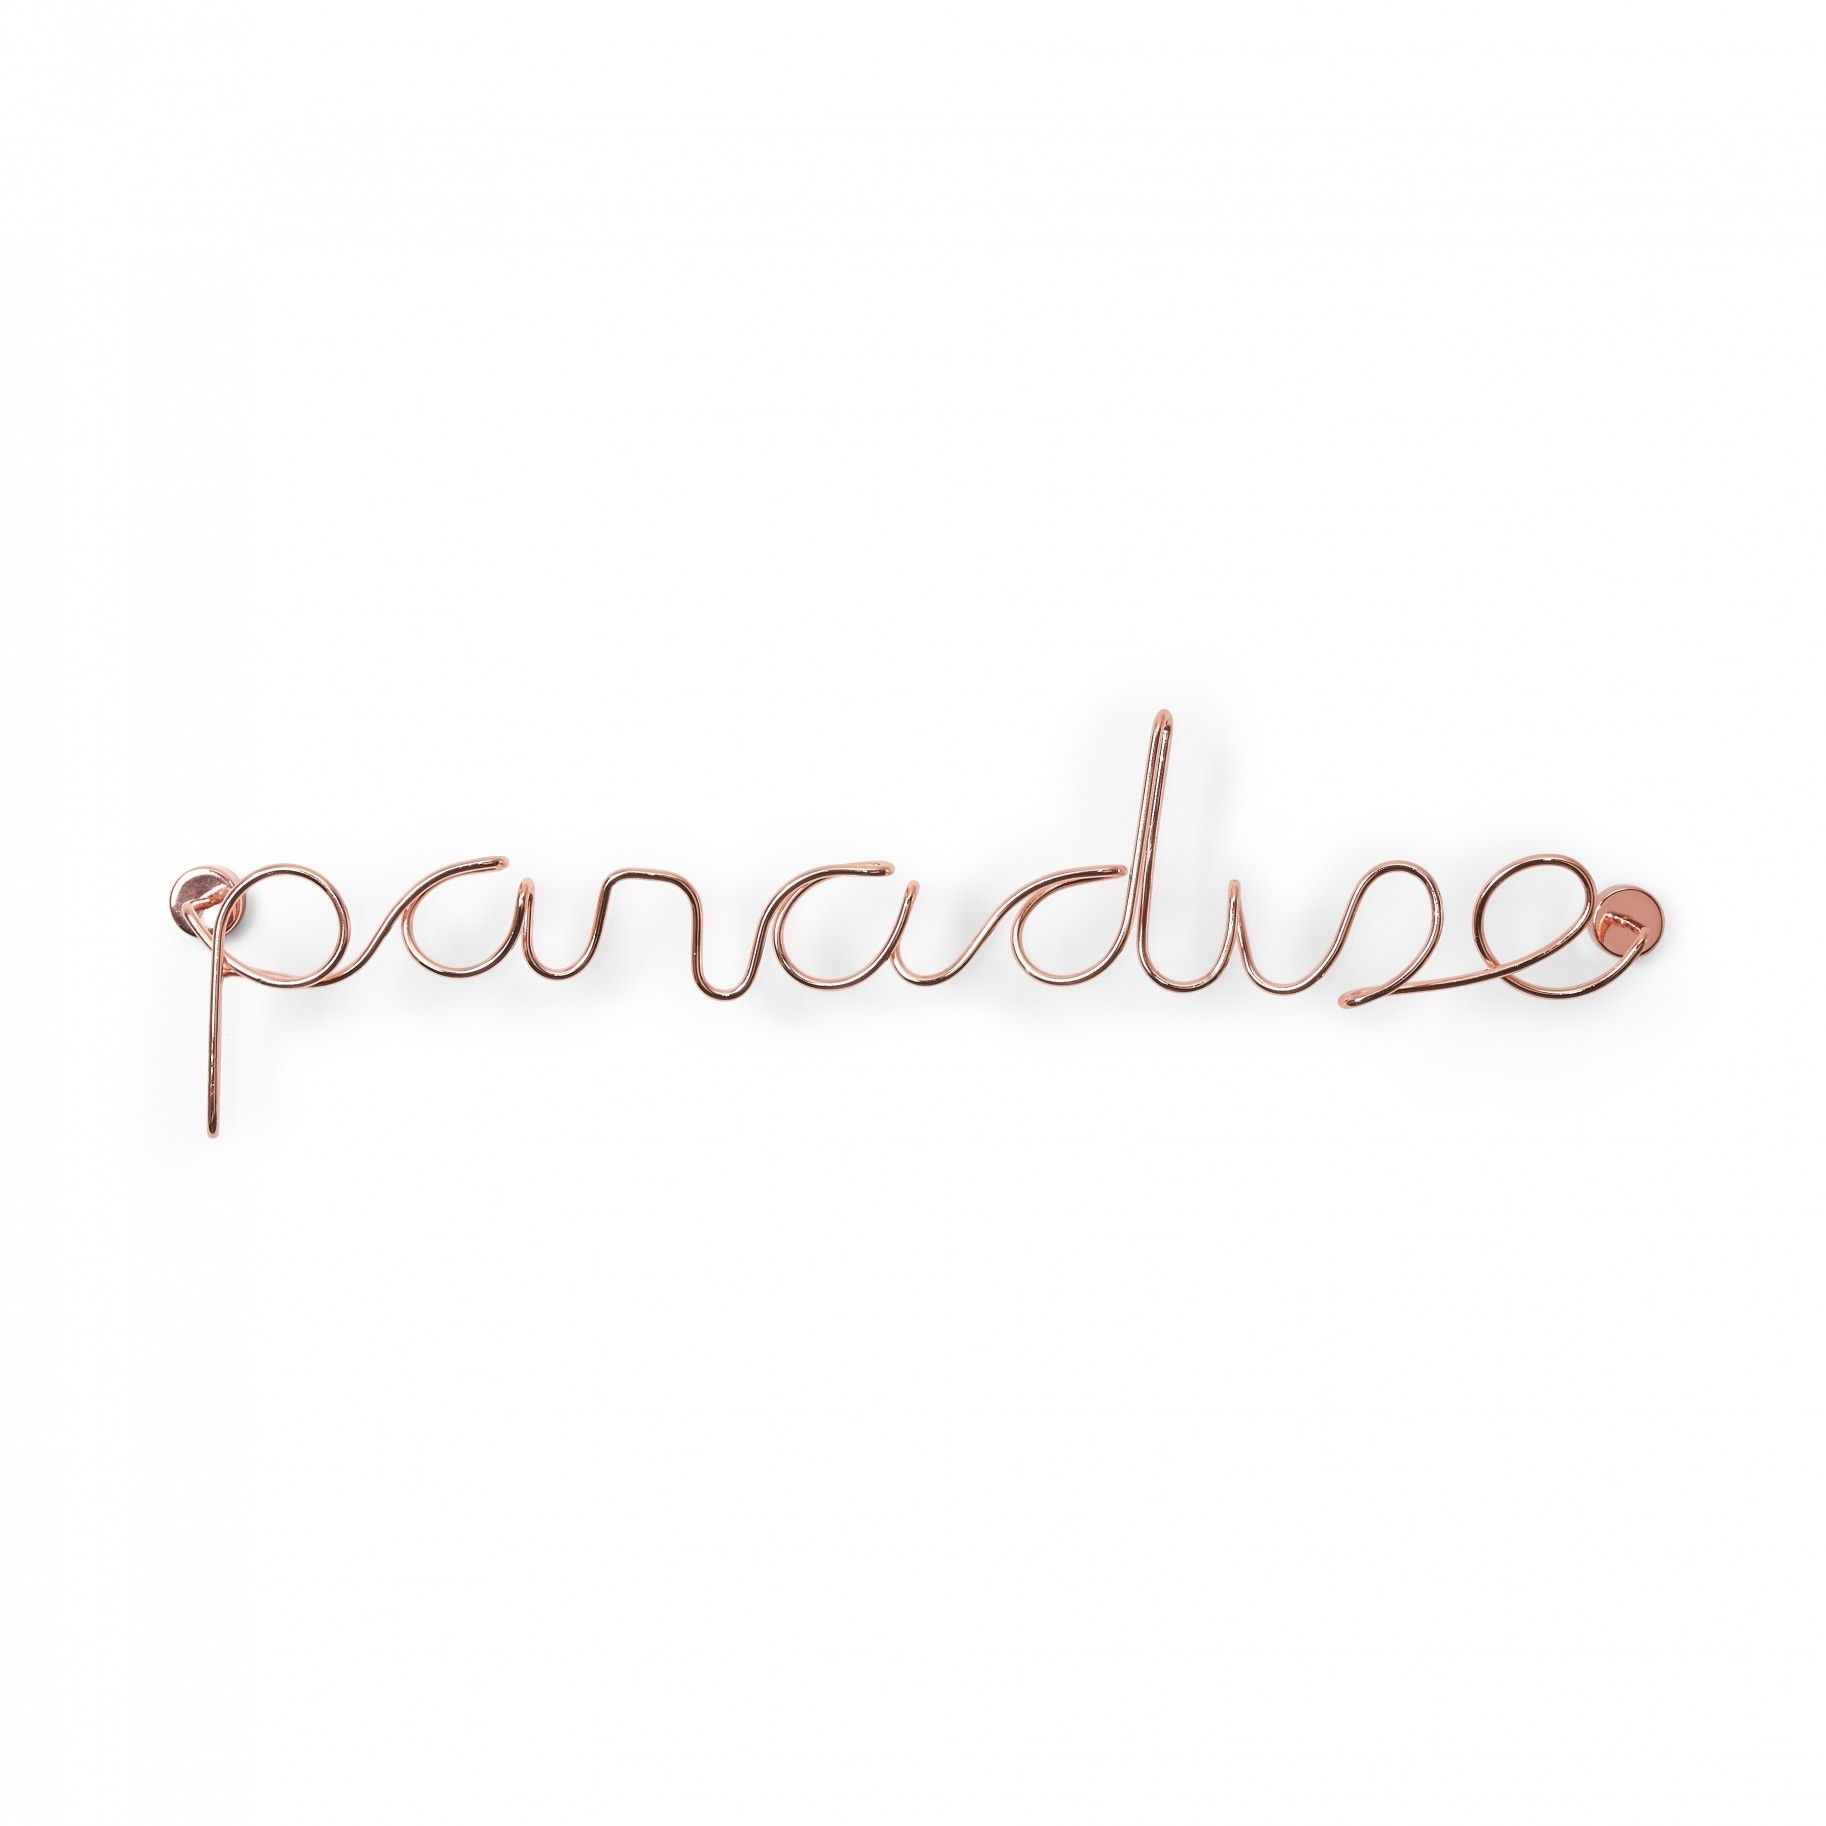 Paradise Wire Wall Decor Copper | Umbra For Wire Wall Art (View 12 of 20)